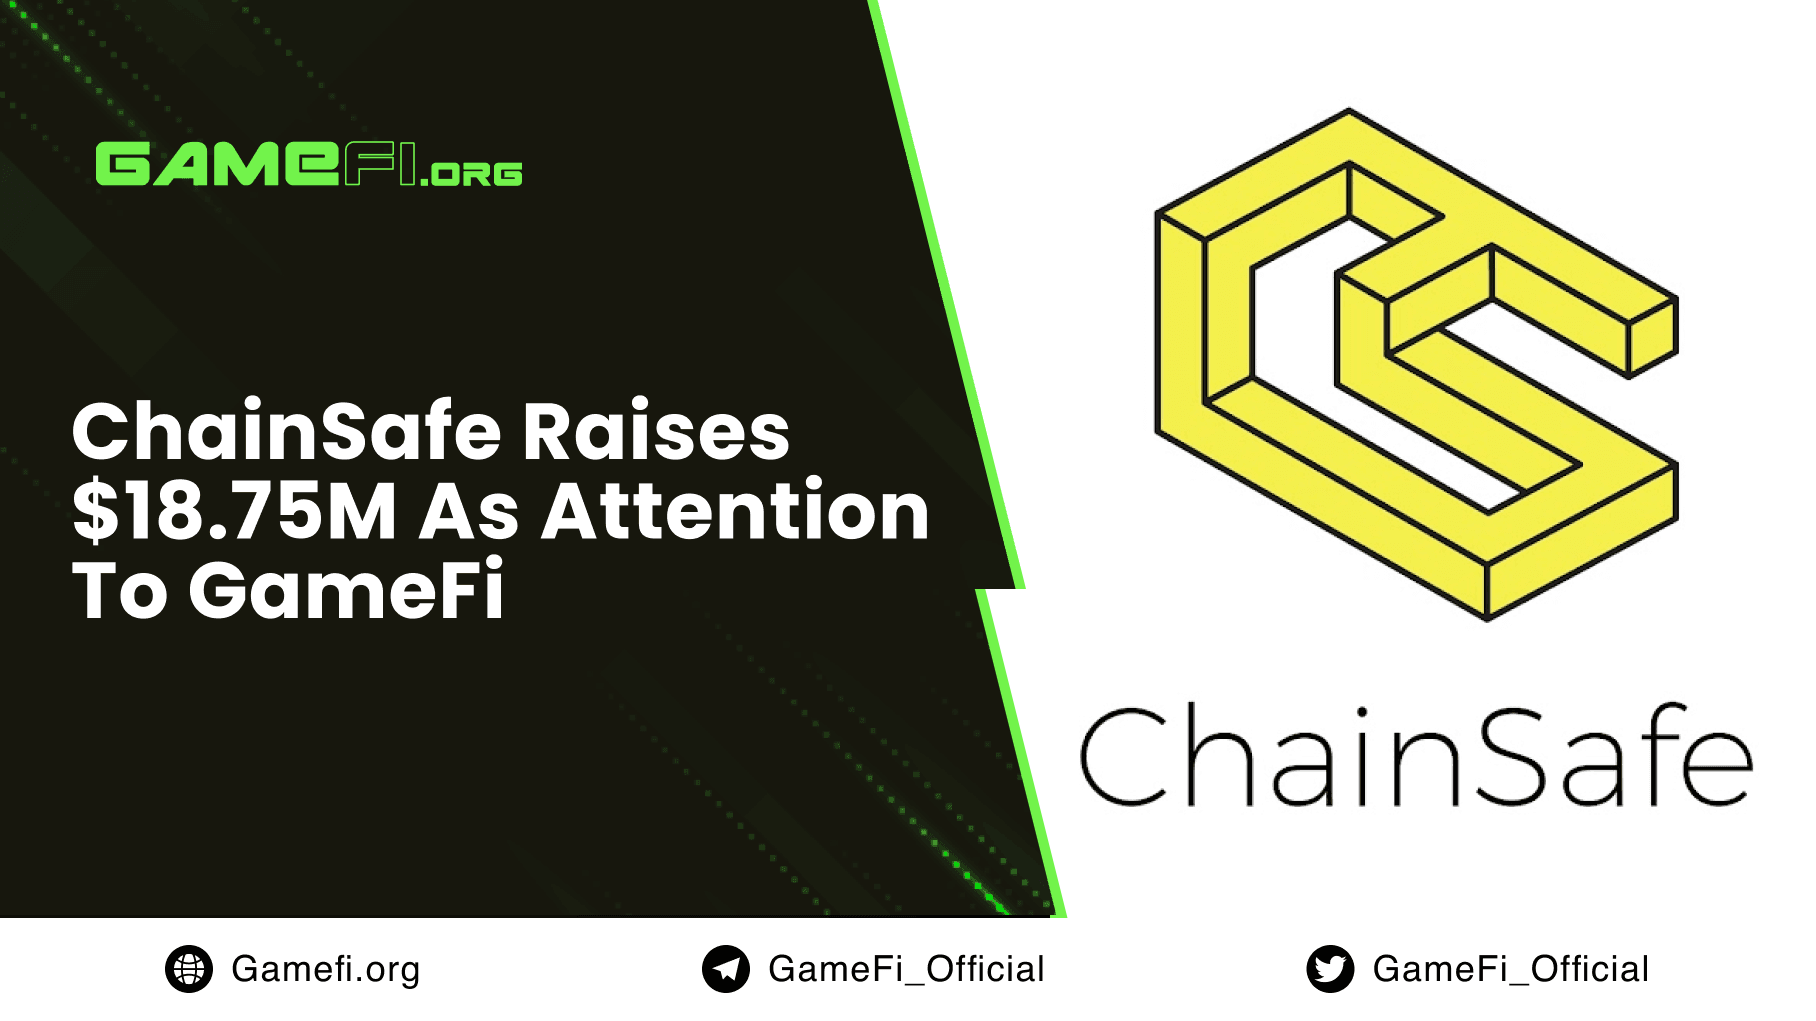 Web3 infrastructure firm ChainSafe raises $18.75M as attention shifts to GameFi